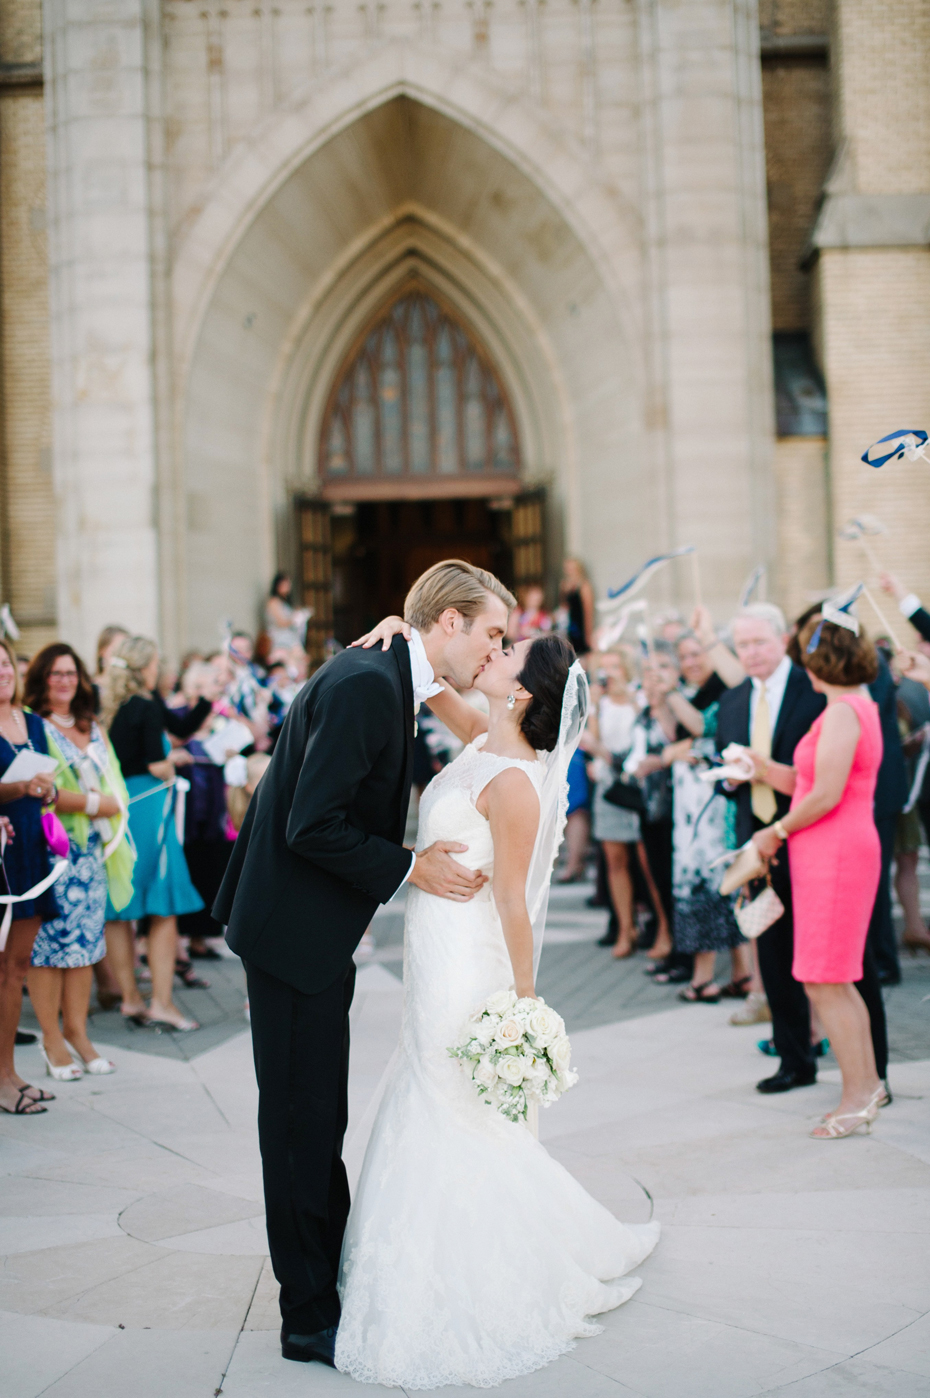 Streamers fly as the Bride and groom exit the church at The Cathedral of Saint Andrew in Grand Rapids Michigan